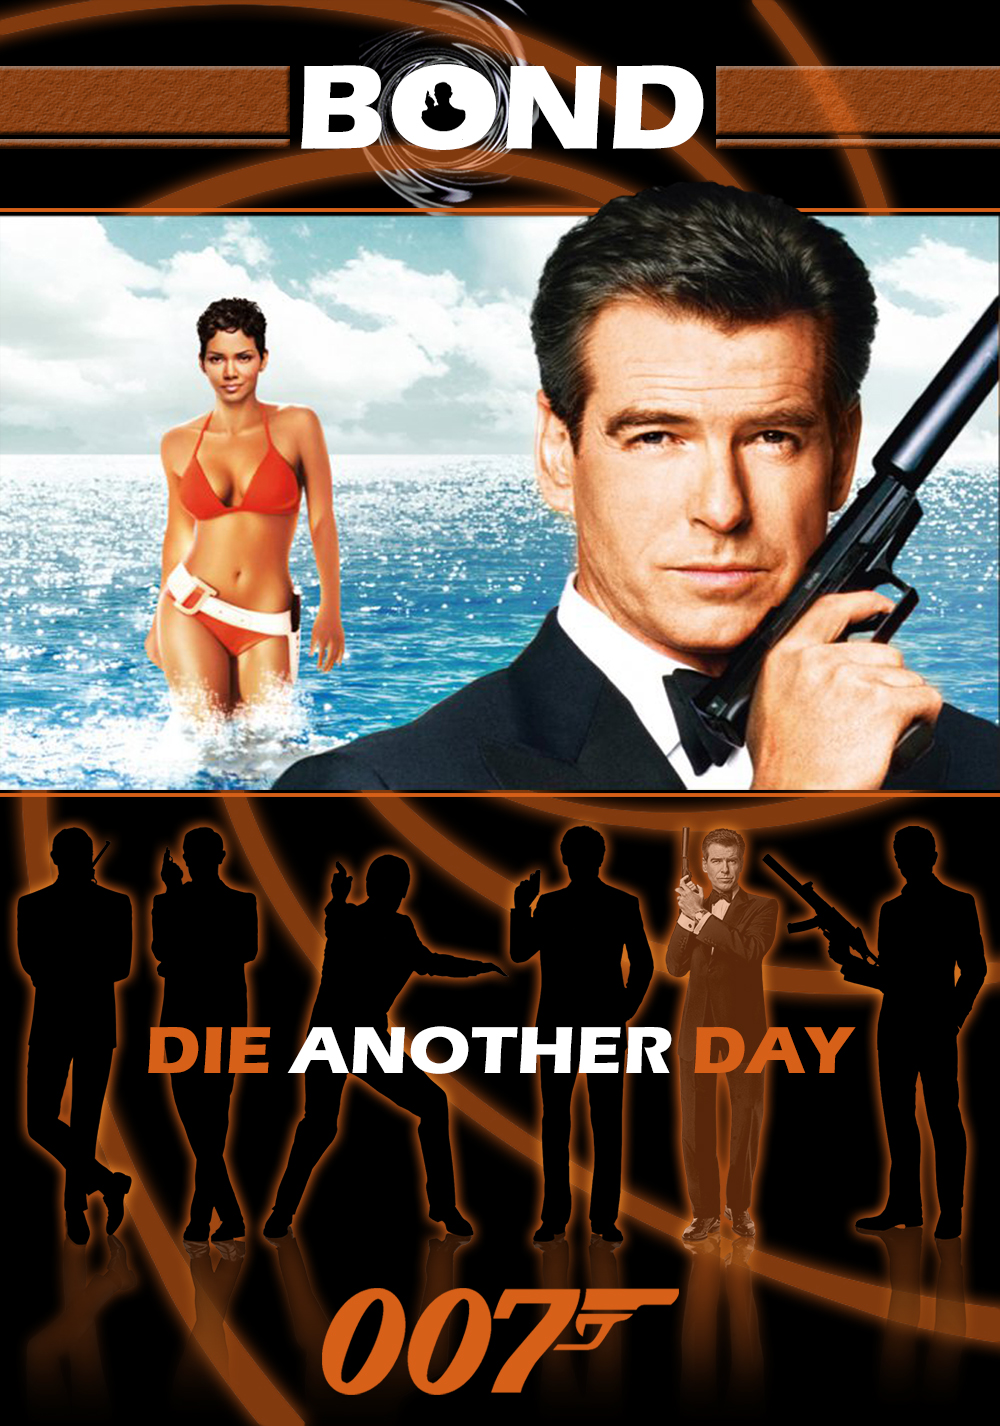 That time pierce brosnan saved halle berry